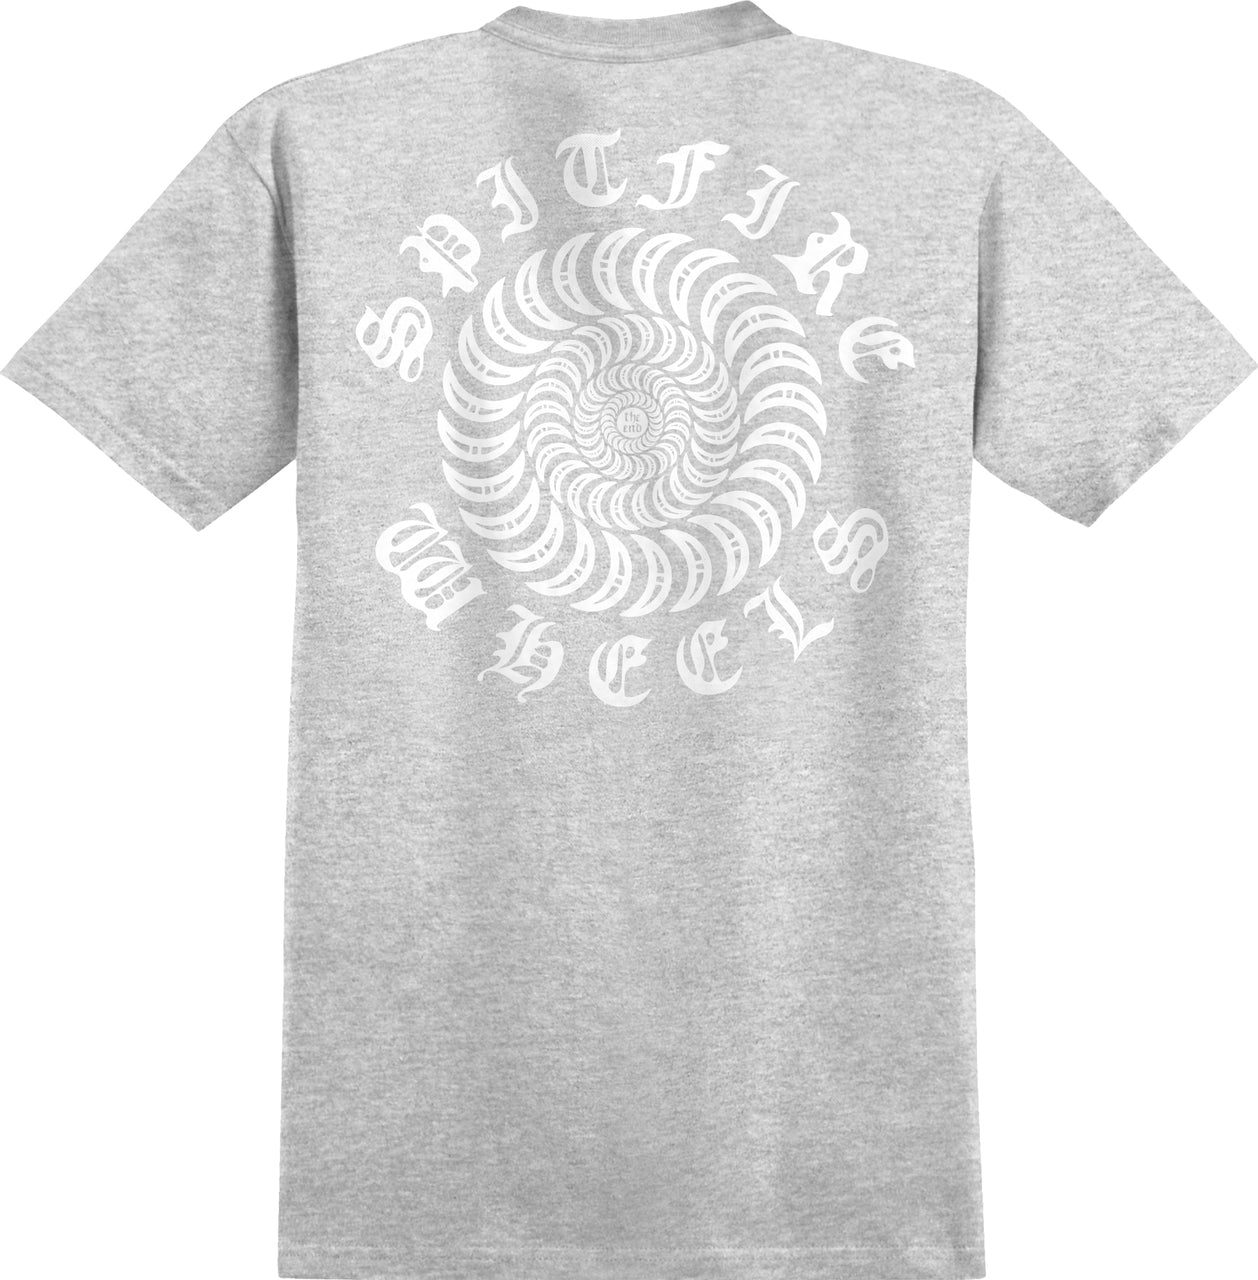 SPITFIRE BLACKLETTER CLASSIC TEE - GREY